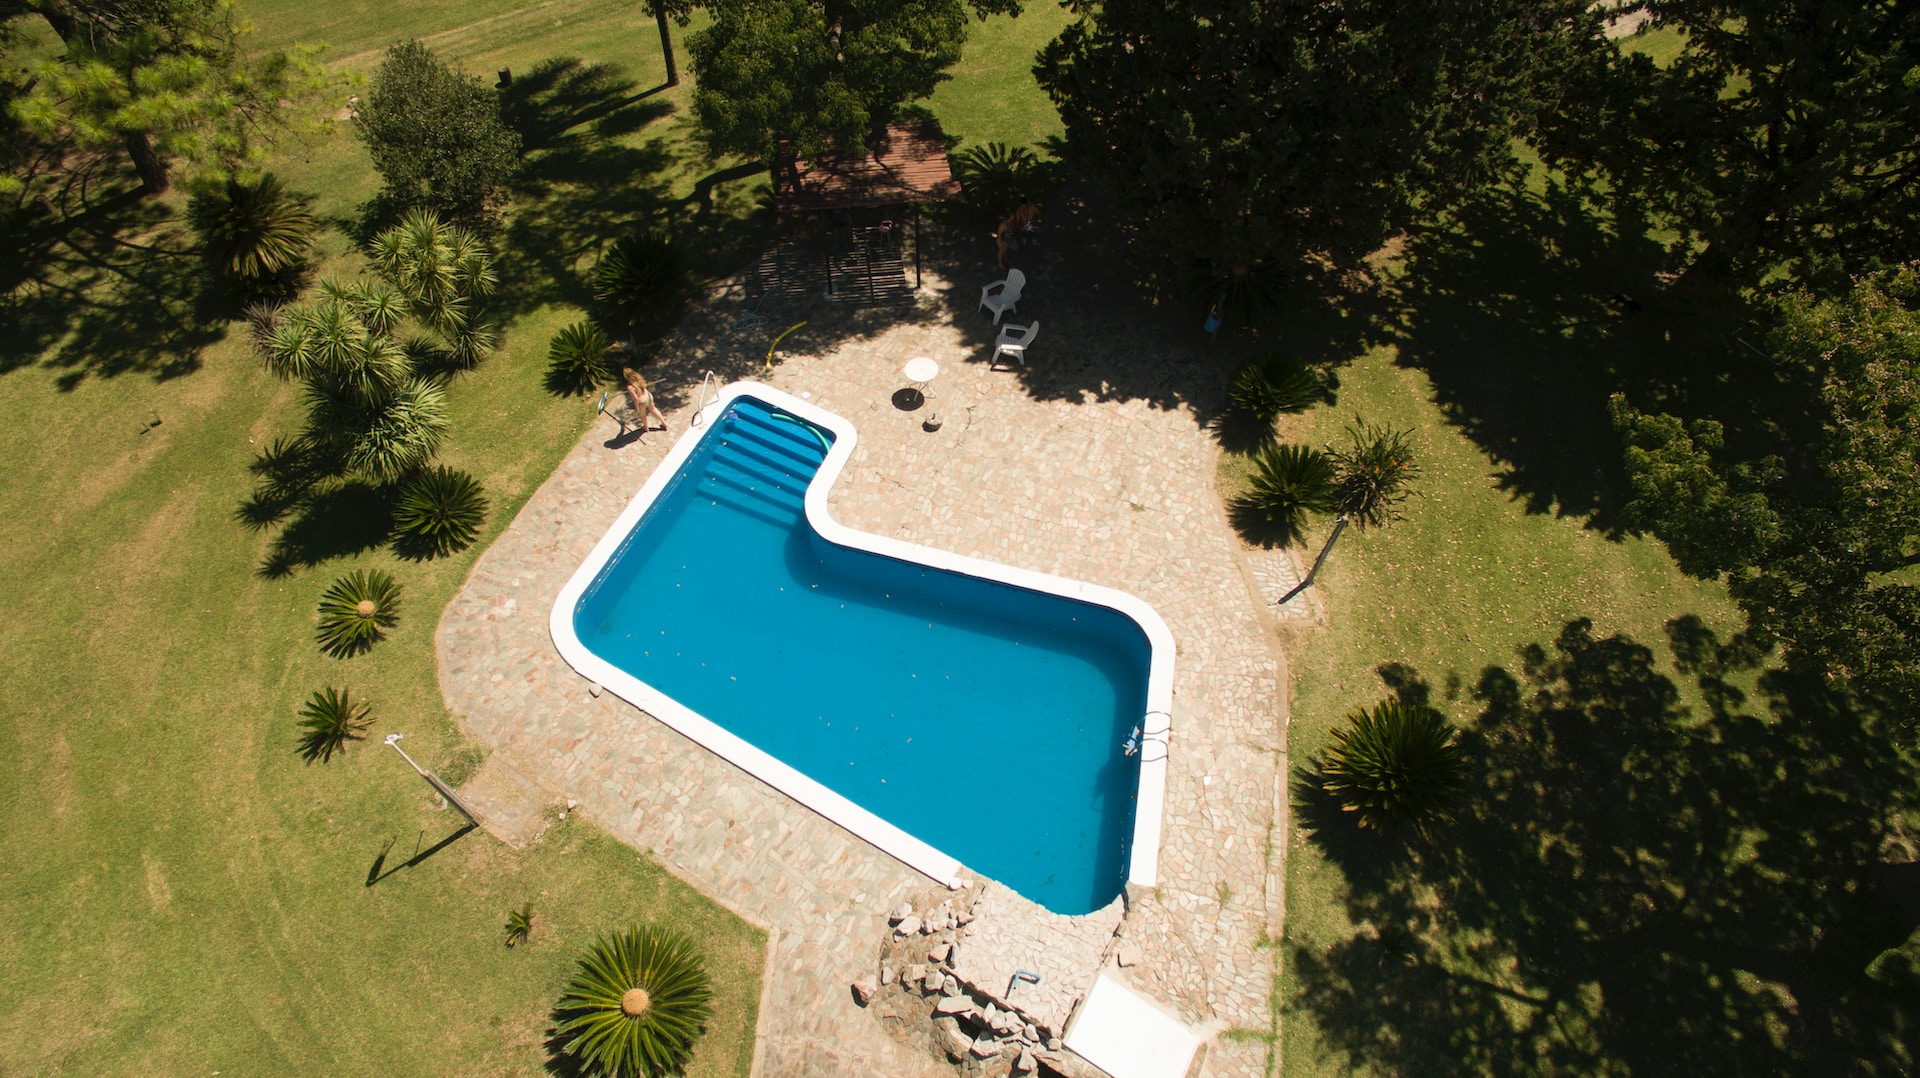 The Challenges of Adding a Pool to your Backyard